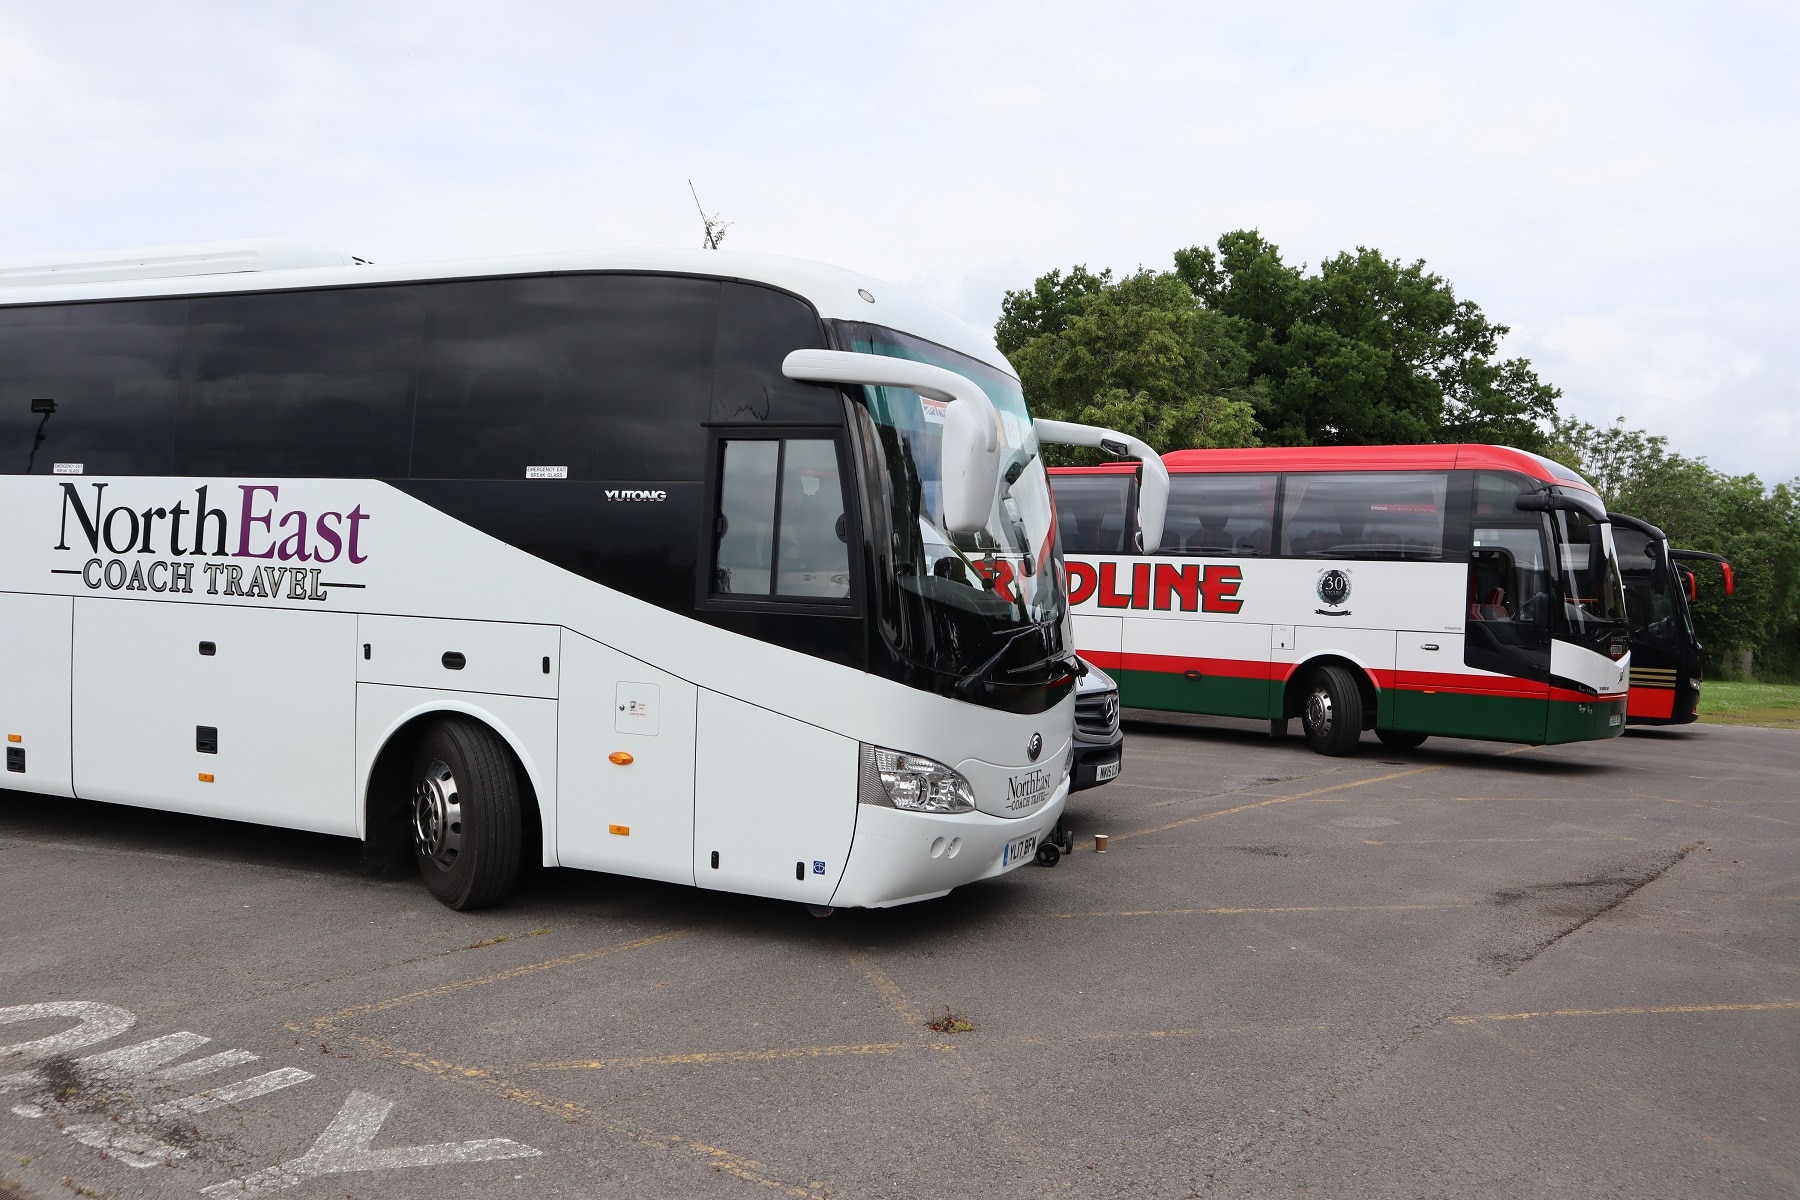 Transport Select Committee to look at the coach industry